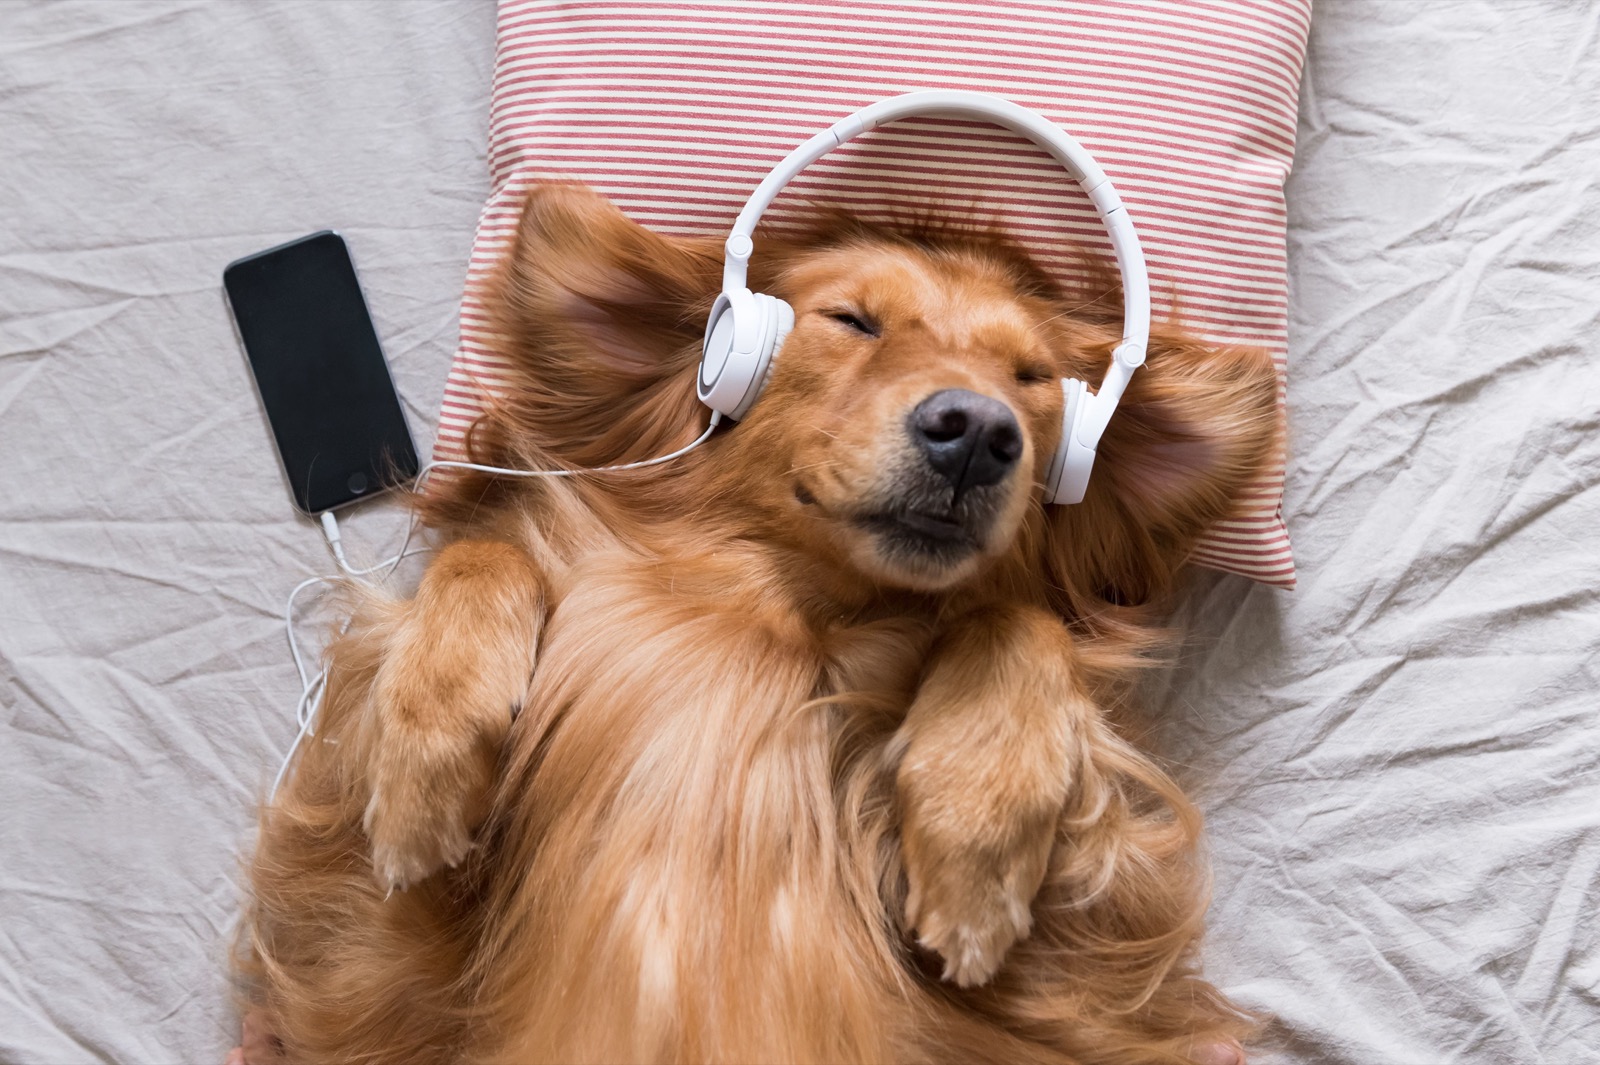 What Should I Eat For Breakfast? Quiz Soothing music for pet dog